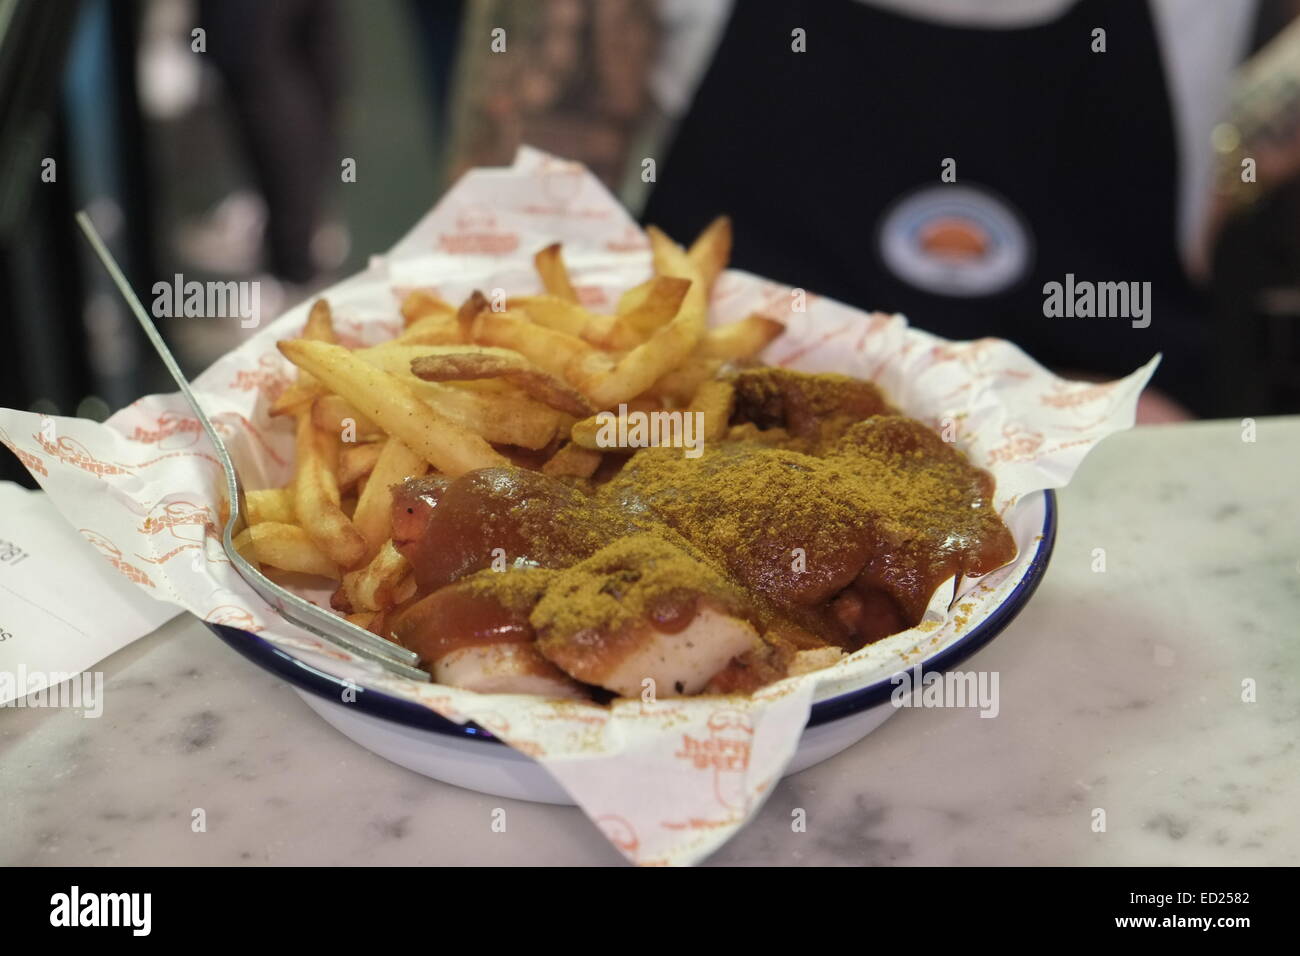 Soho, London, UK. 01st Oct, 2014. Currywurst (curry-flavored bratwurst) and French fries are served in the restaurant 'Herman ze German' in Soho, London, United Kingdom, 01 October 2014. Arts, culture, and luxury goods 'Made in Germany' are en vogue in London. Shortly before Christmas, Londoners are particularly fond of German food. Photo: Marc Schaefer/dpa/Alamy Live News Stock Photo